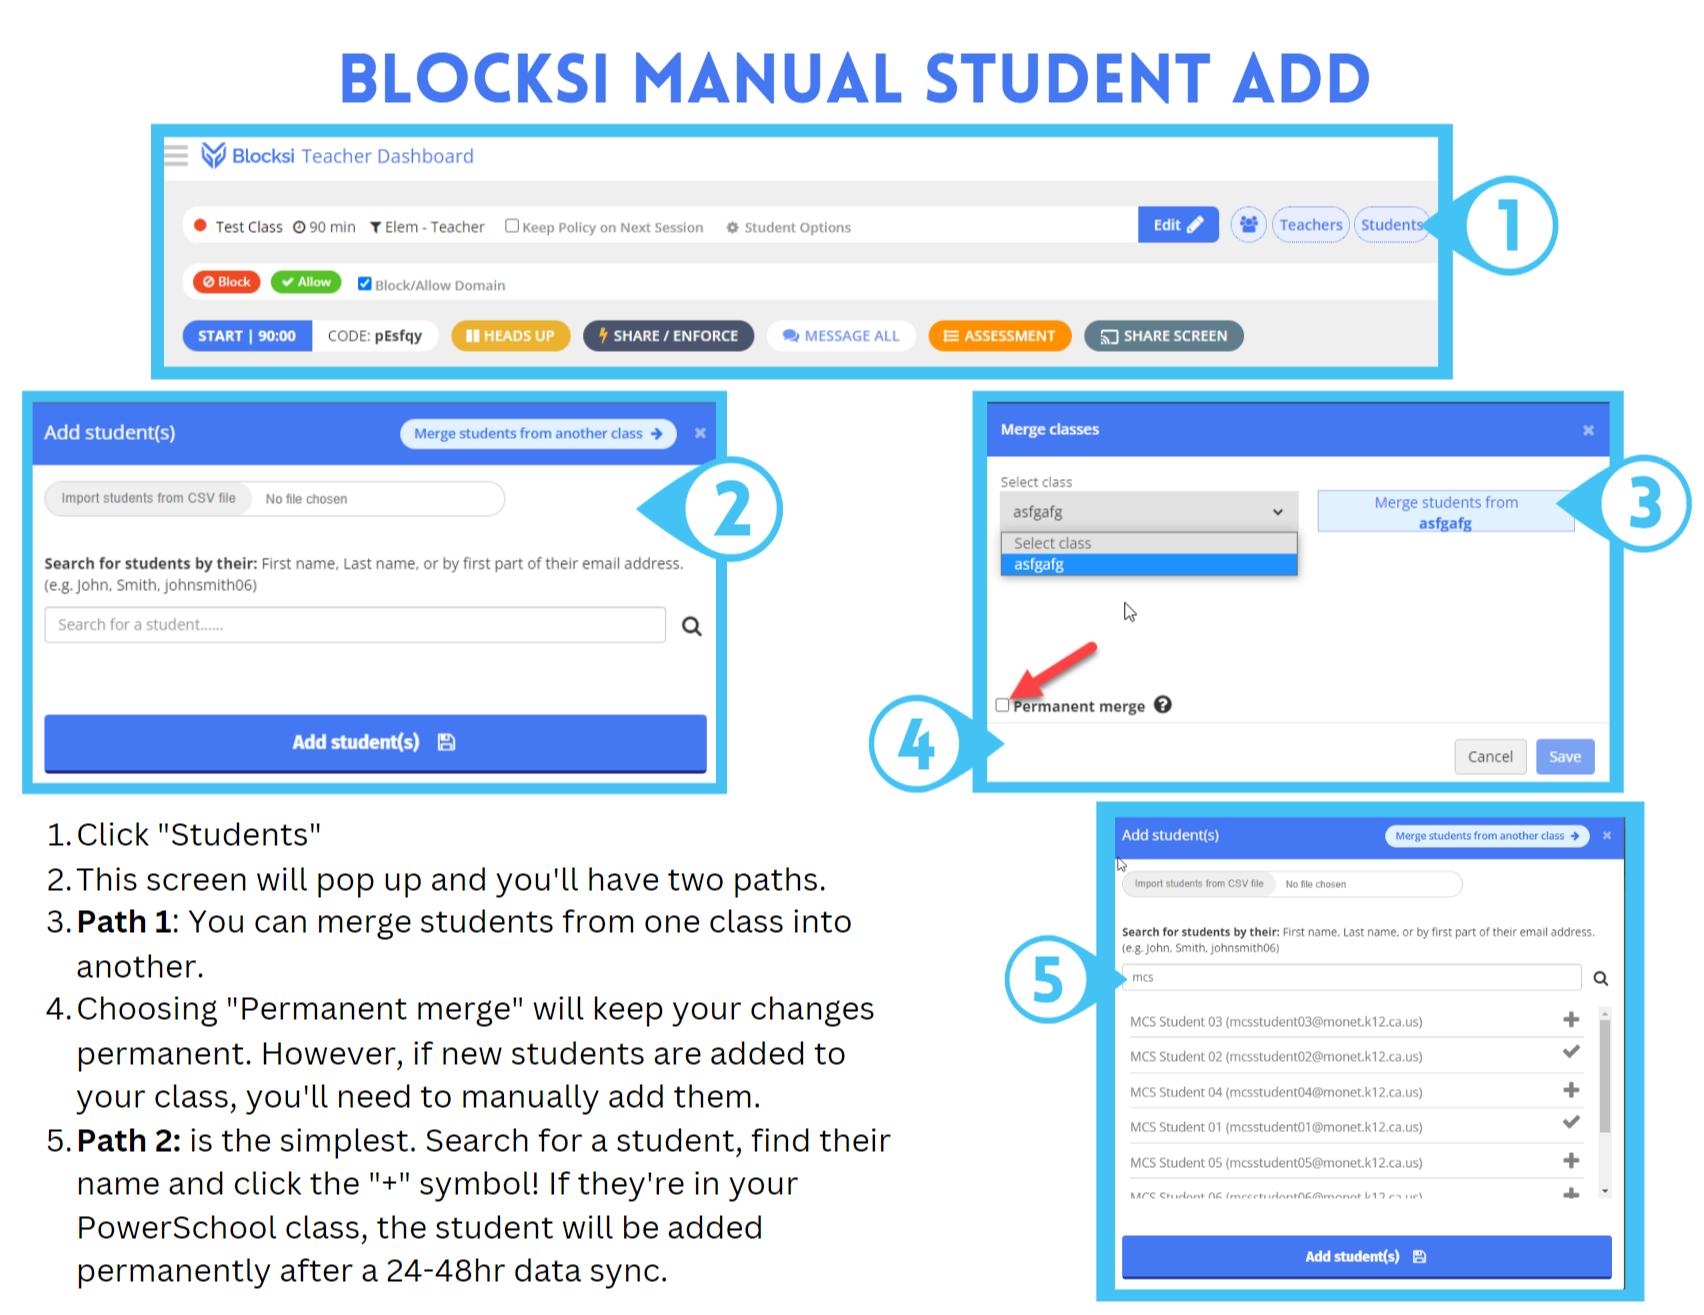 image how to add students manually